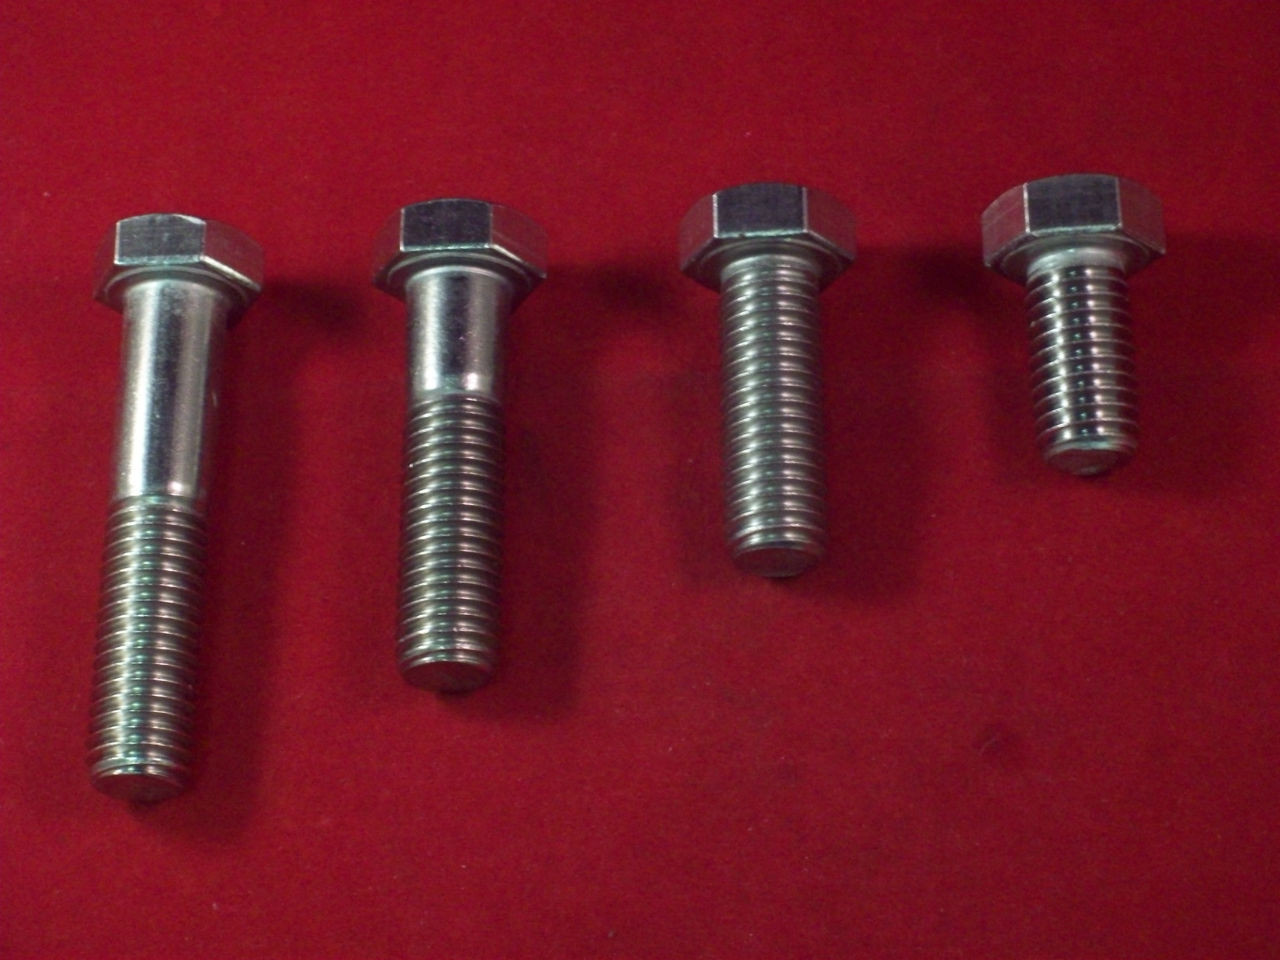 18 8 stainless steel bolts